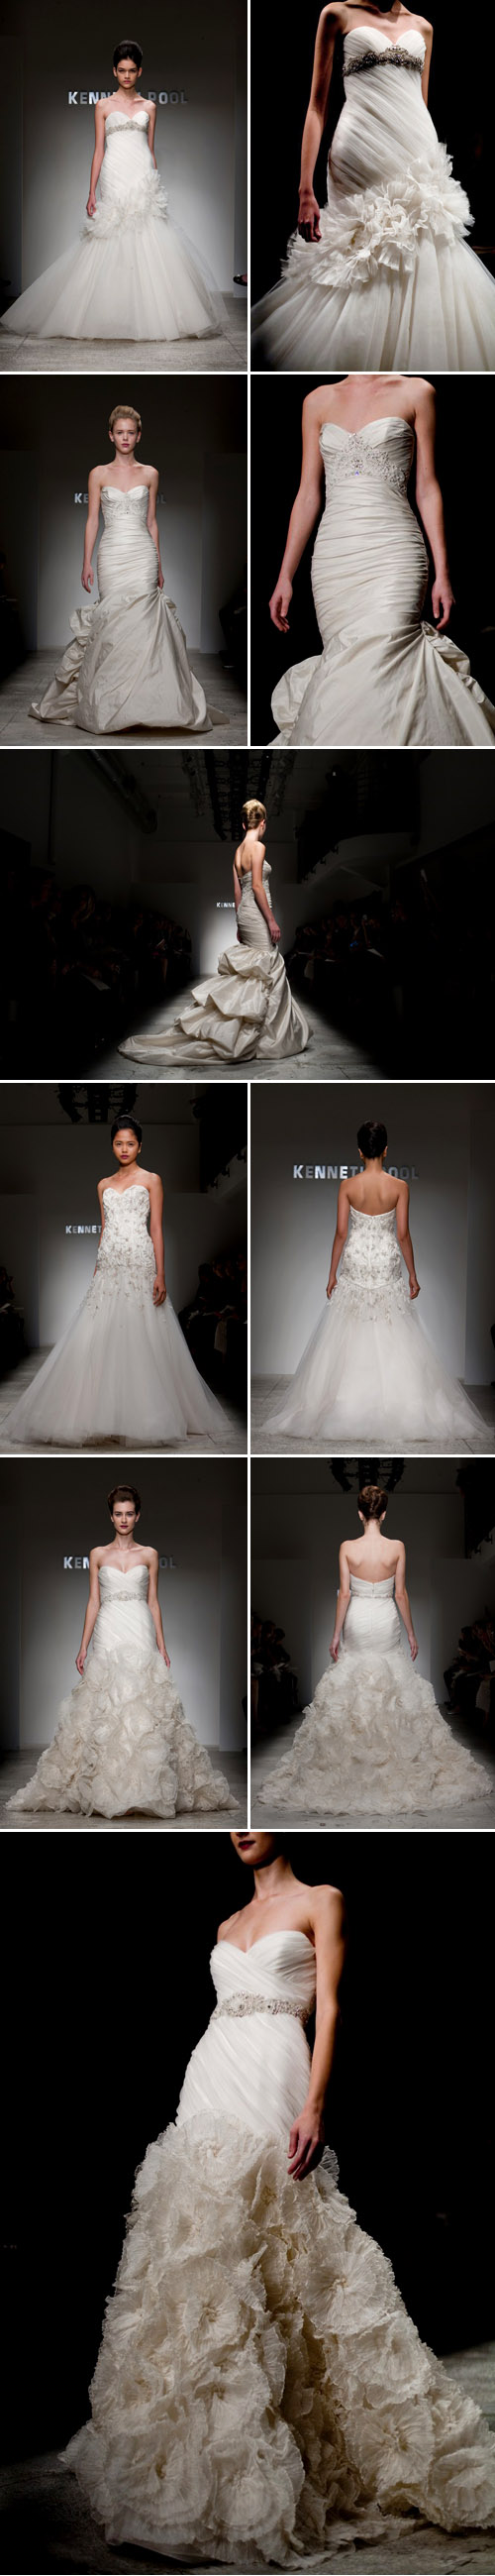 Kenneth Pool spring 2011 wedding dress collection, New York Bridal Market, photos by John and Joseph Photography